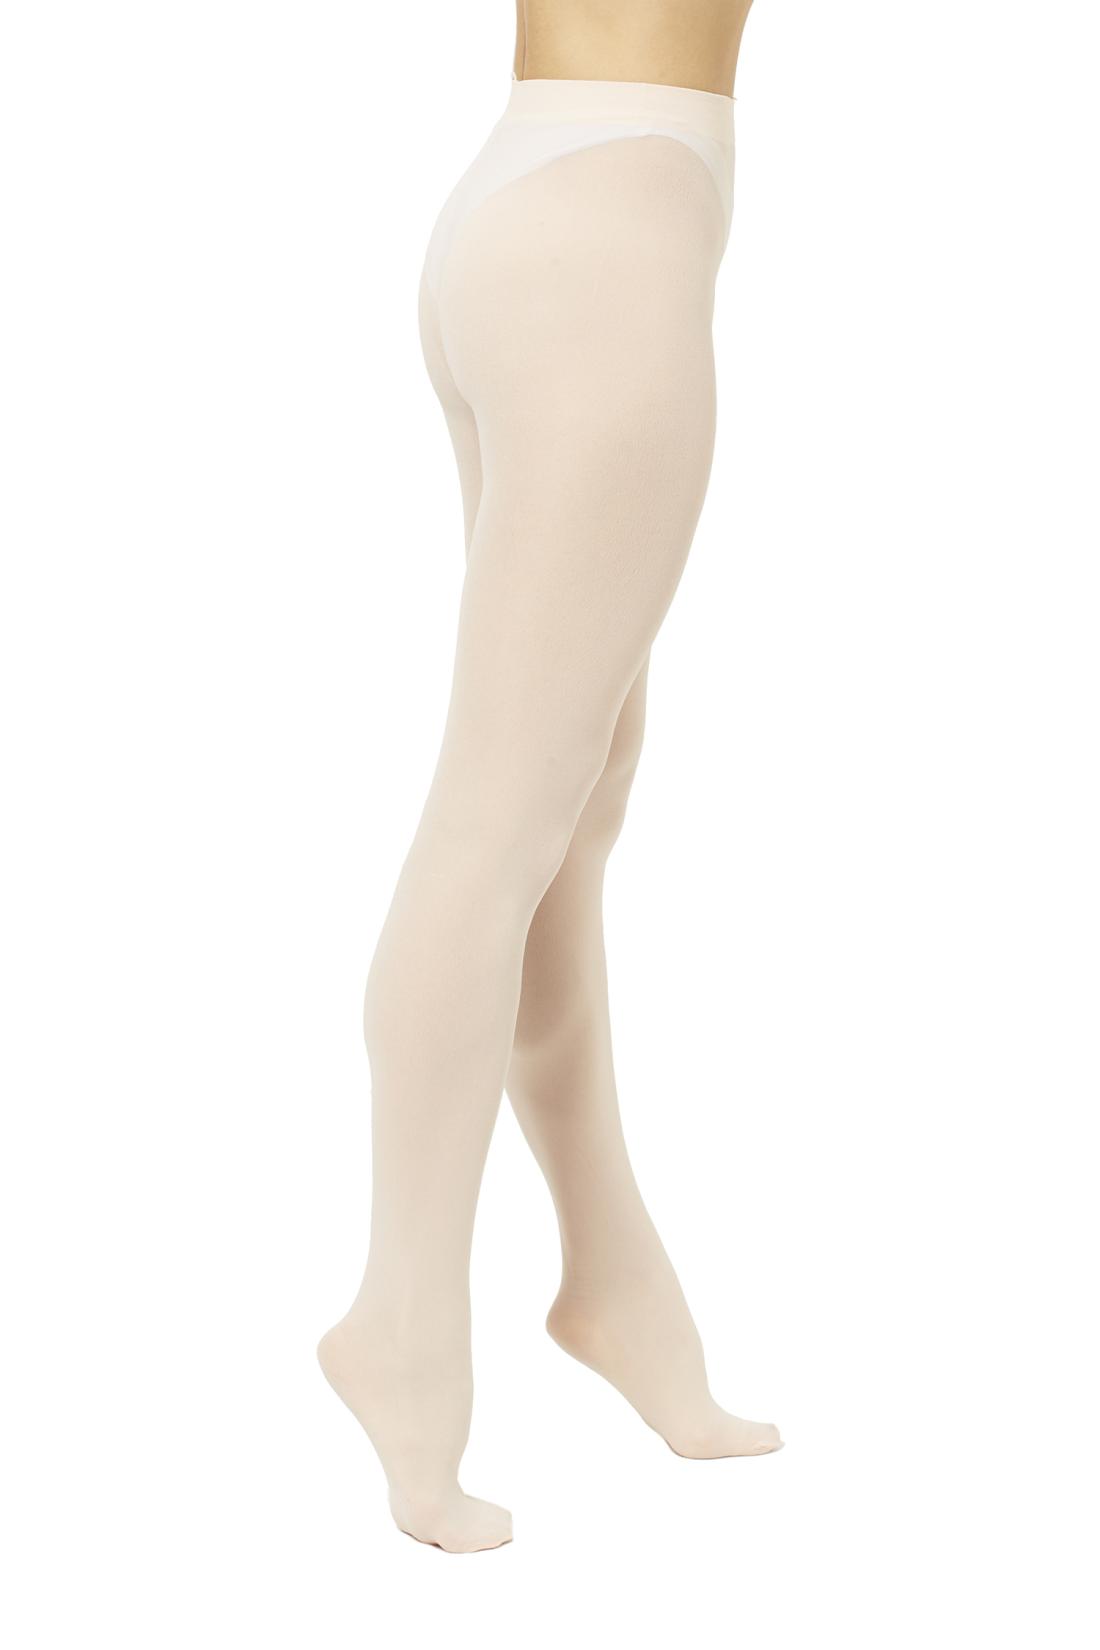 Basic Footed Ballet Classical Dance Multifiber Tights Intermezzo